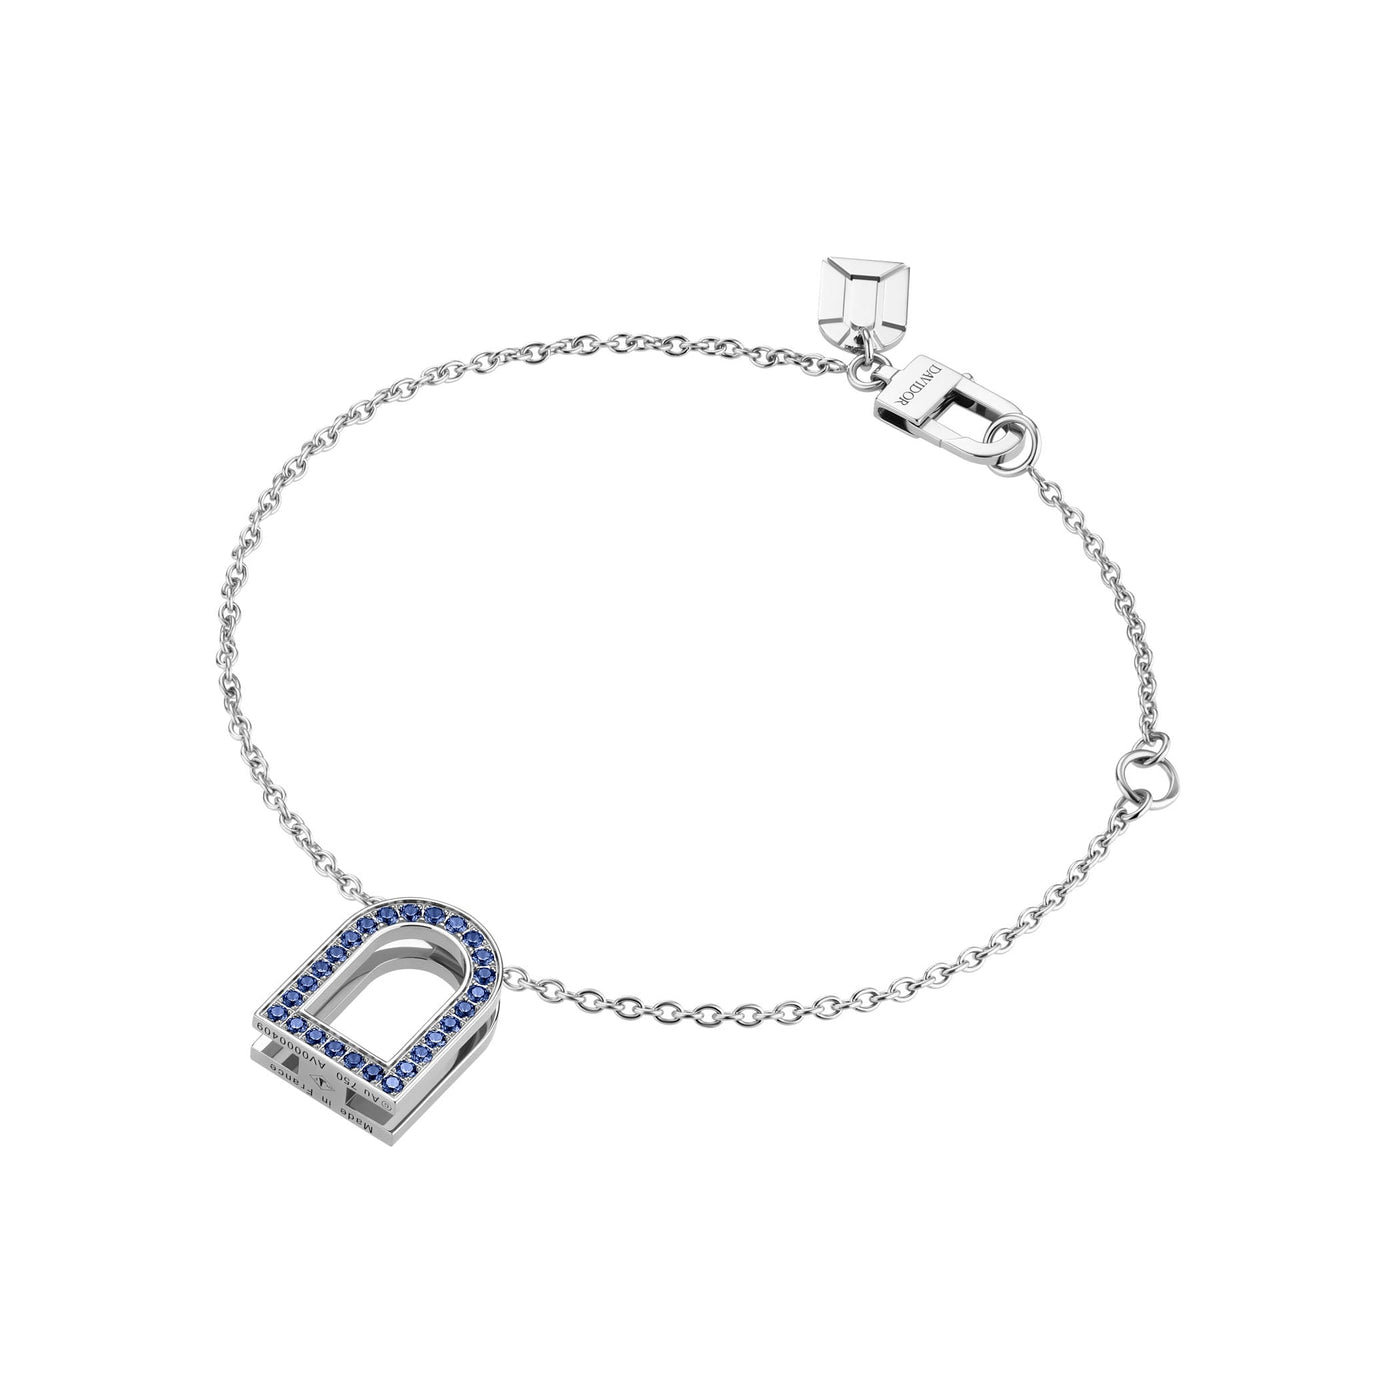 L'Arc Voyage Charm MM, 18k White Gold with Galerie Blue Sapphires on Chain Bracelet - DAVIDOR